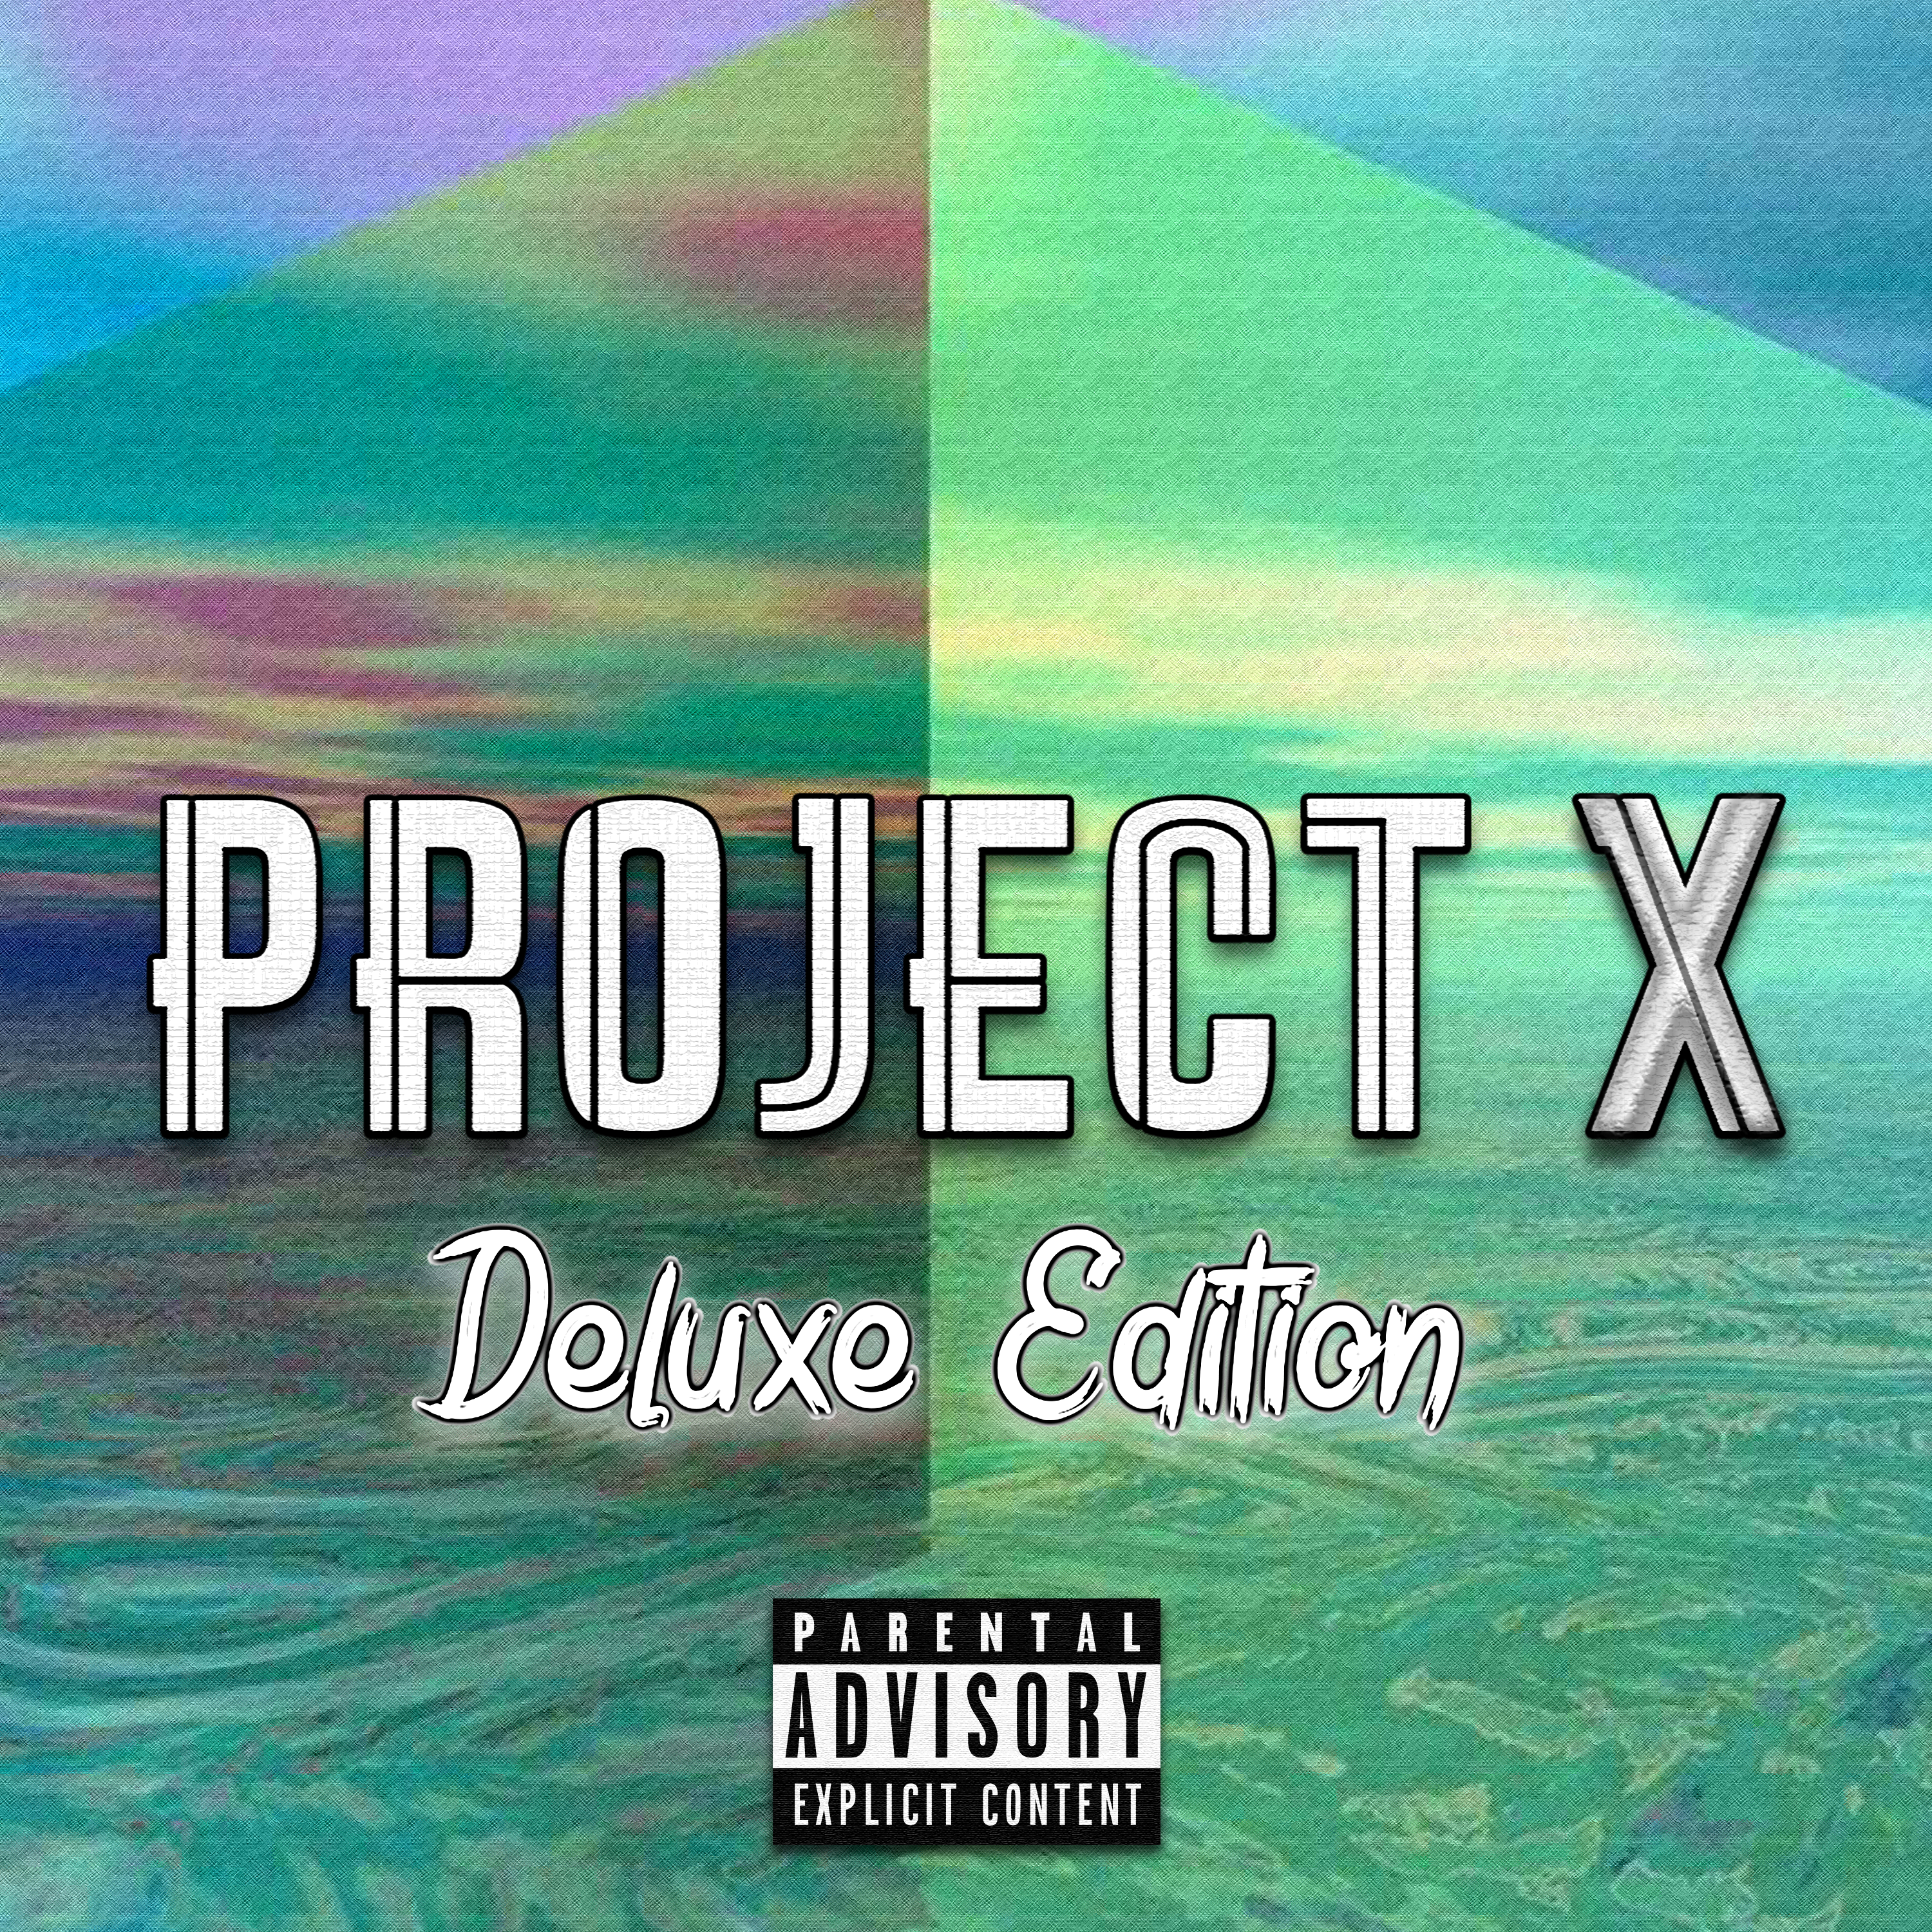 Project X (Deluxe)